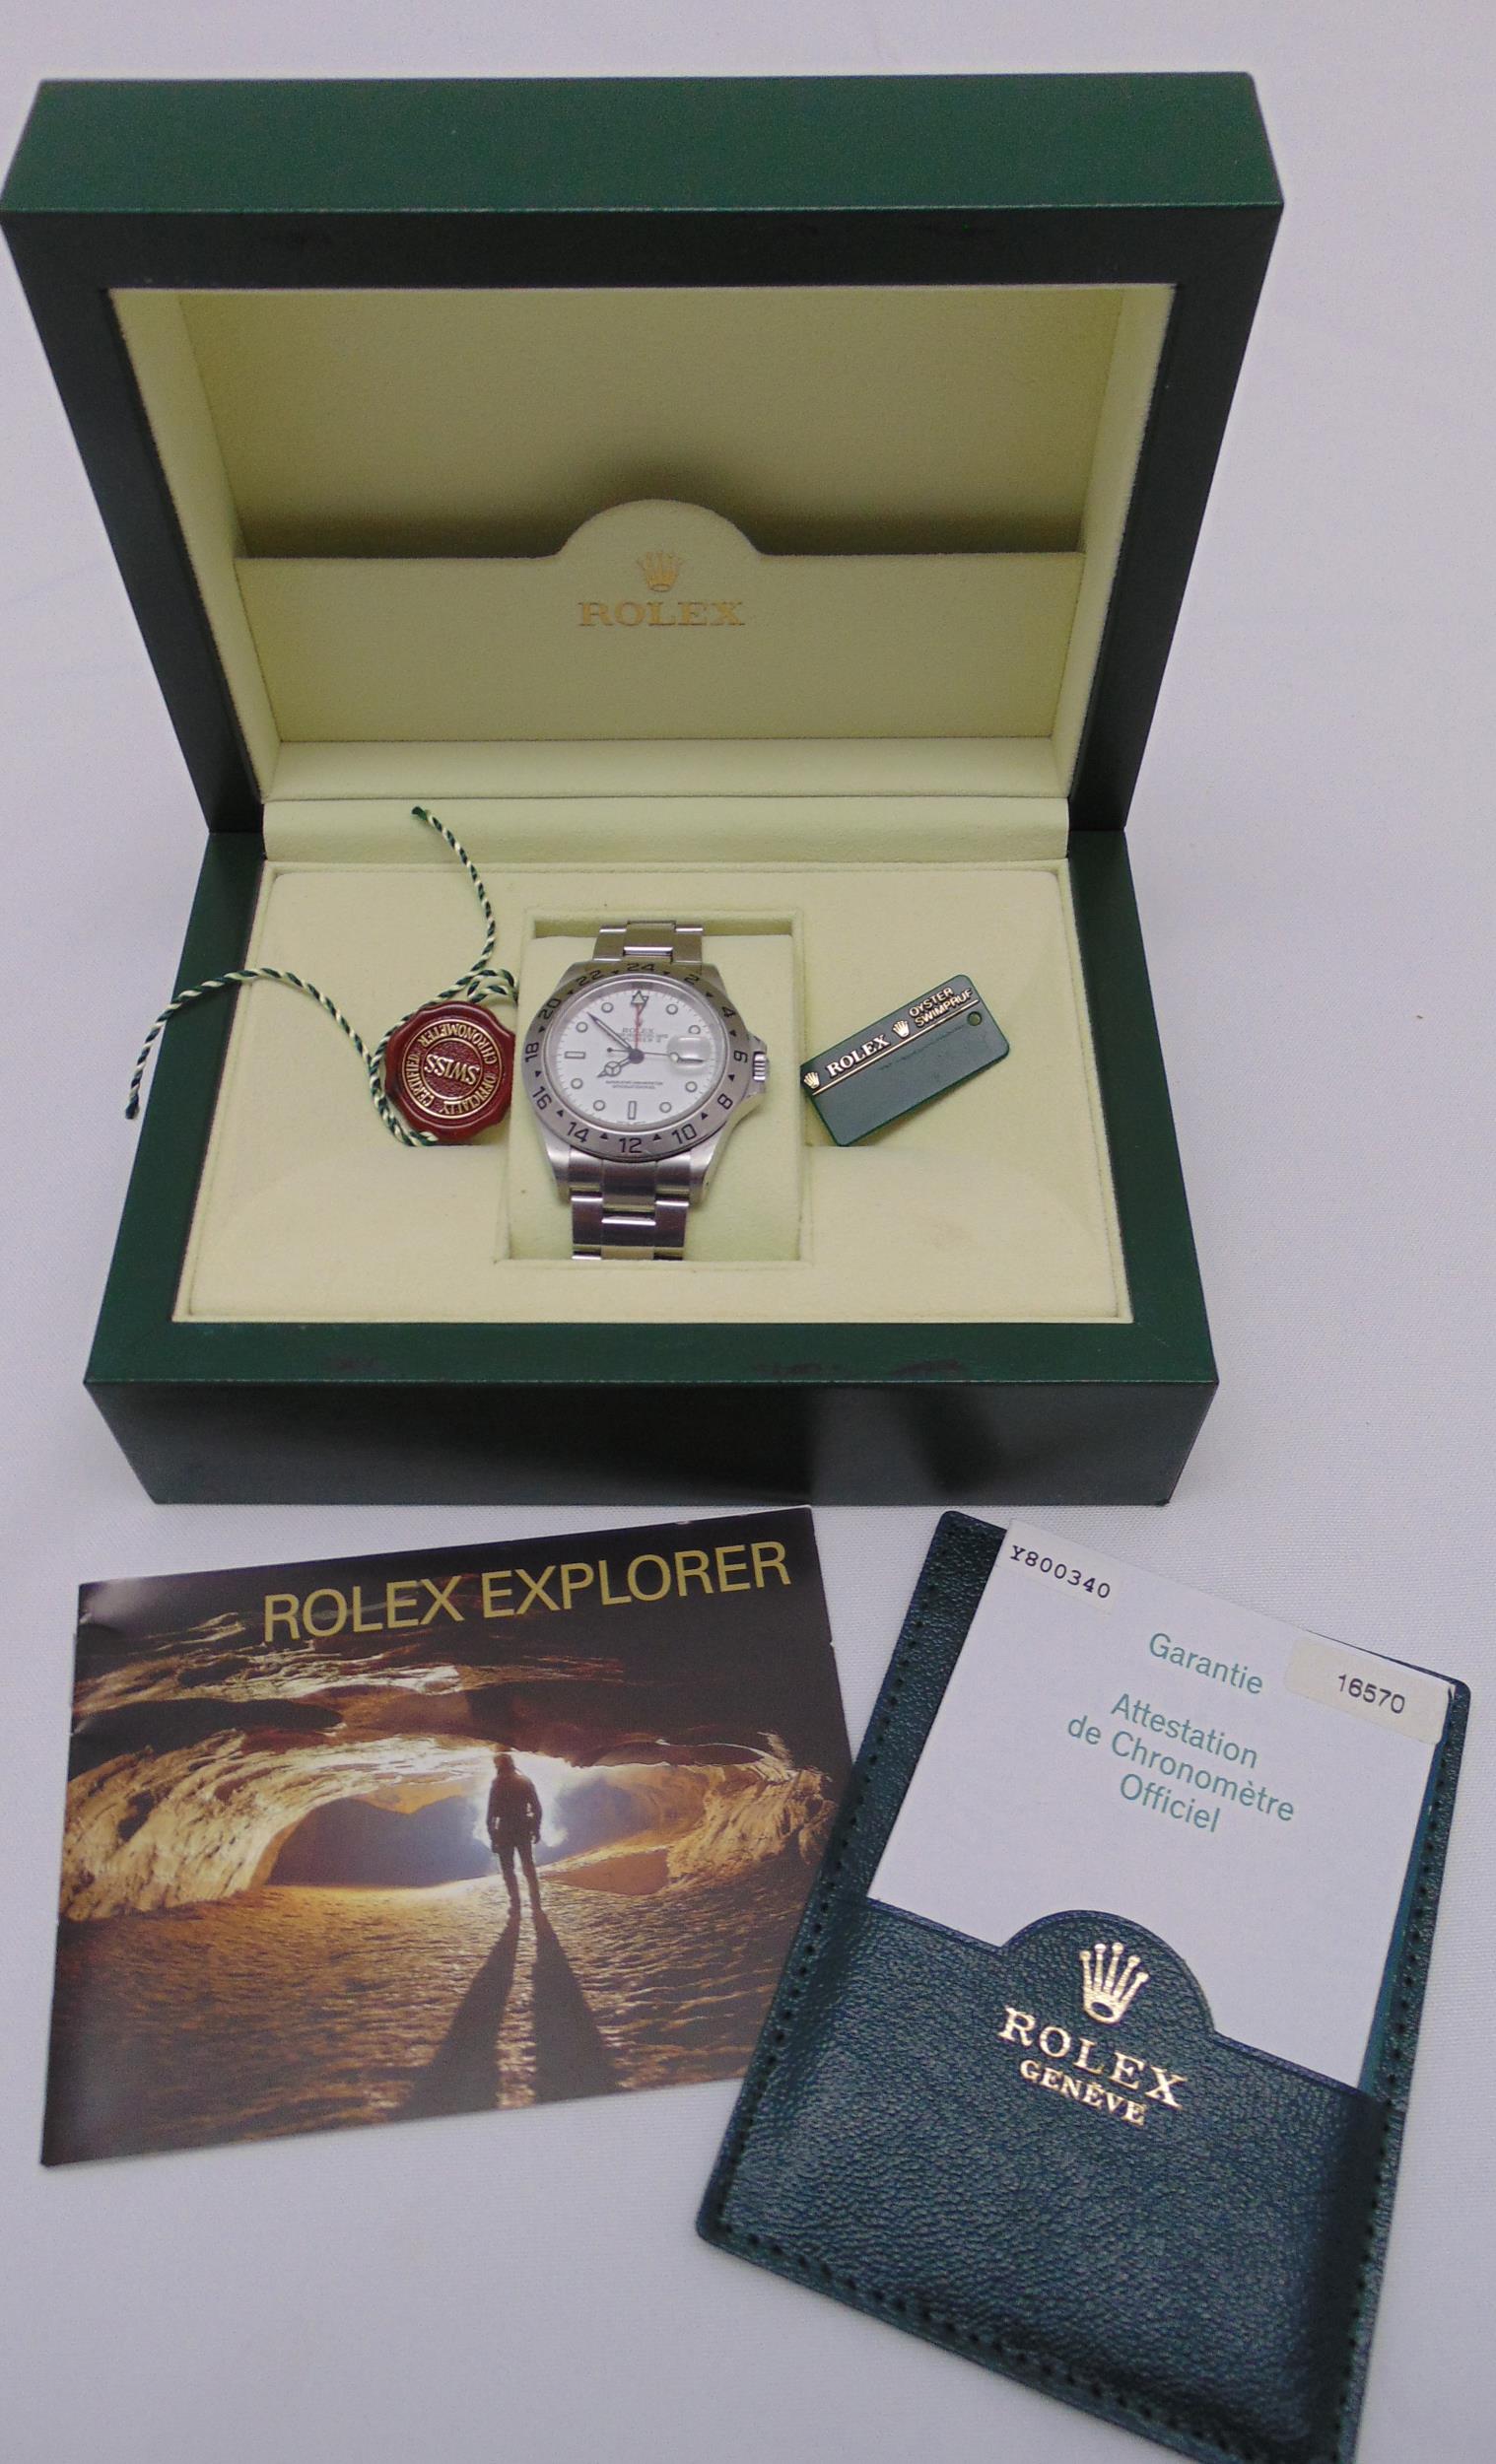 Rolex Oyster Perpetual Date Explorer II gentlemans superlative chronometer stainless steel with